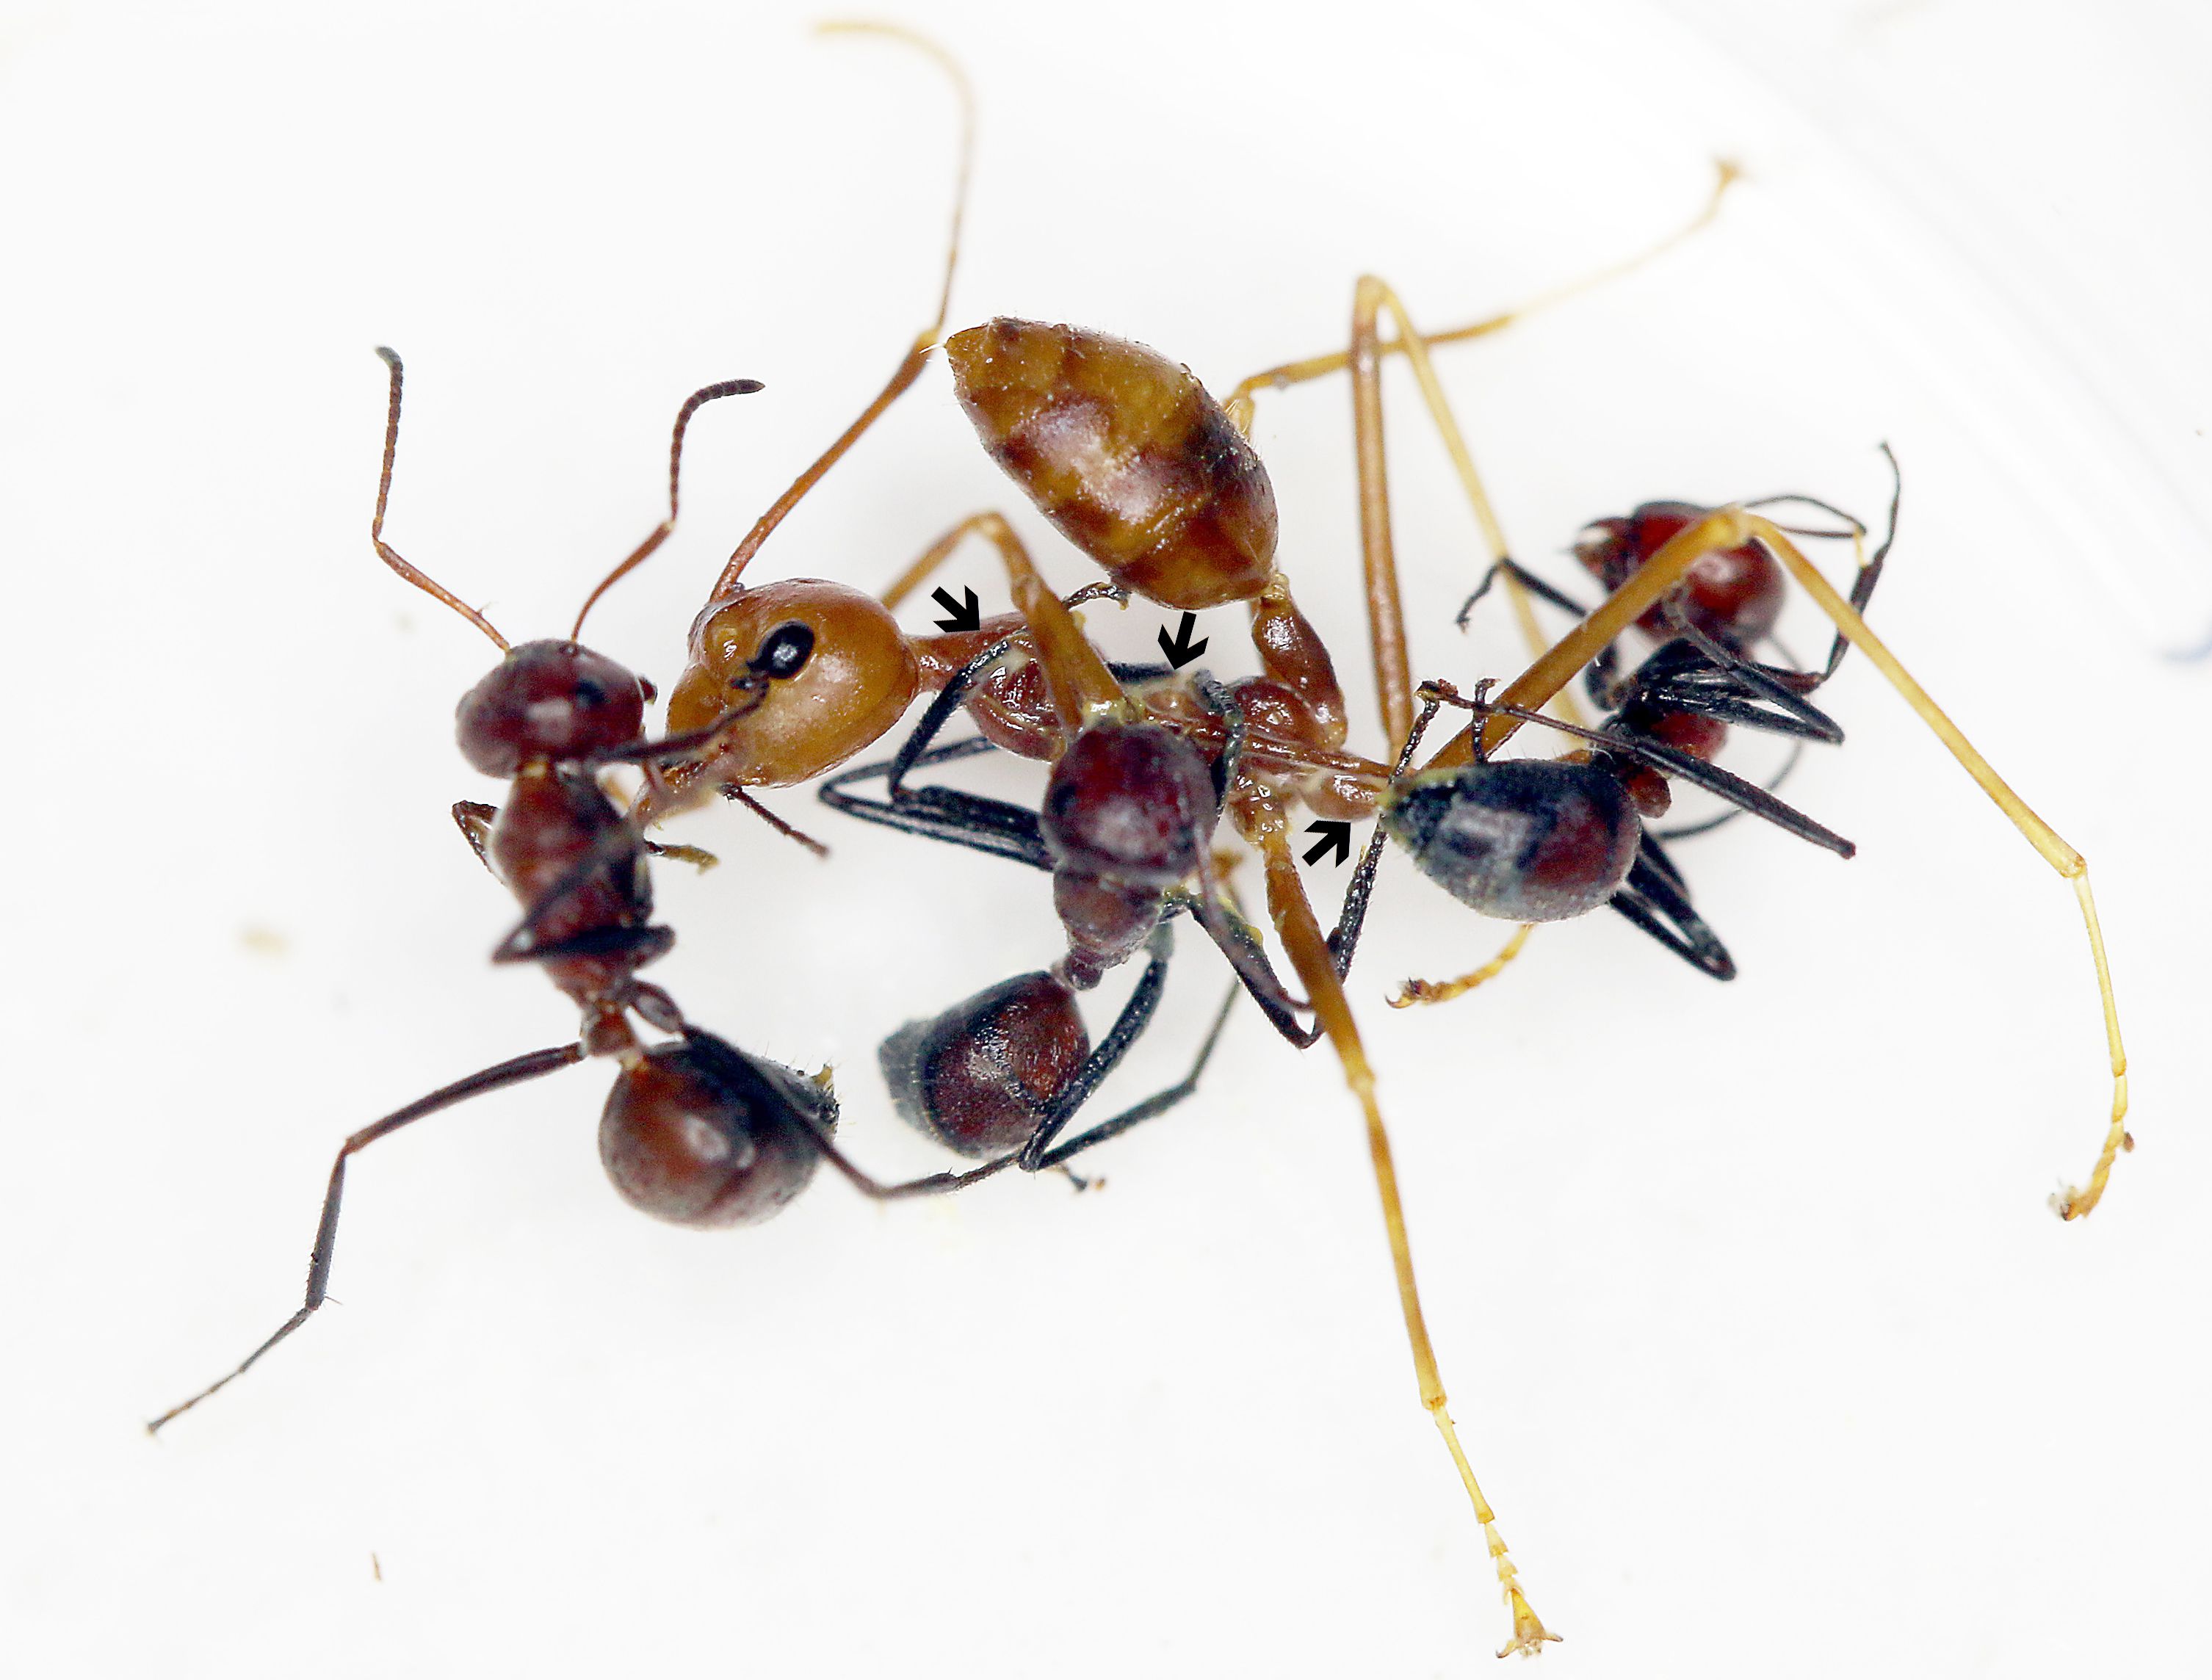 Scientists Discover New Species of 'Exploding Ant'